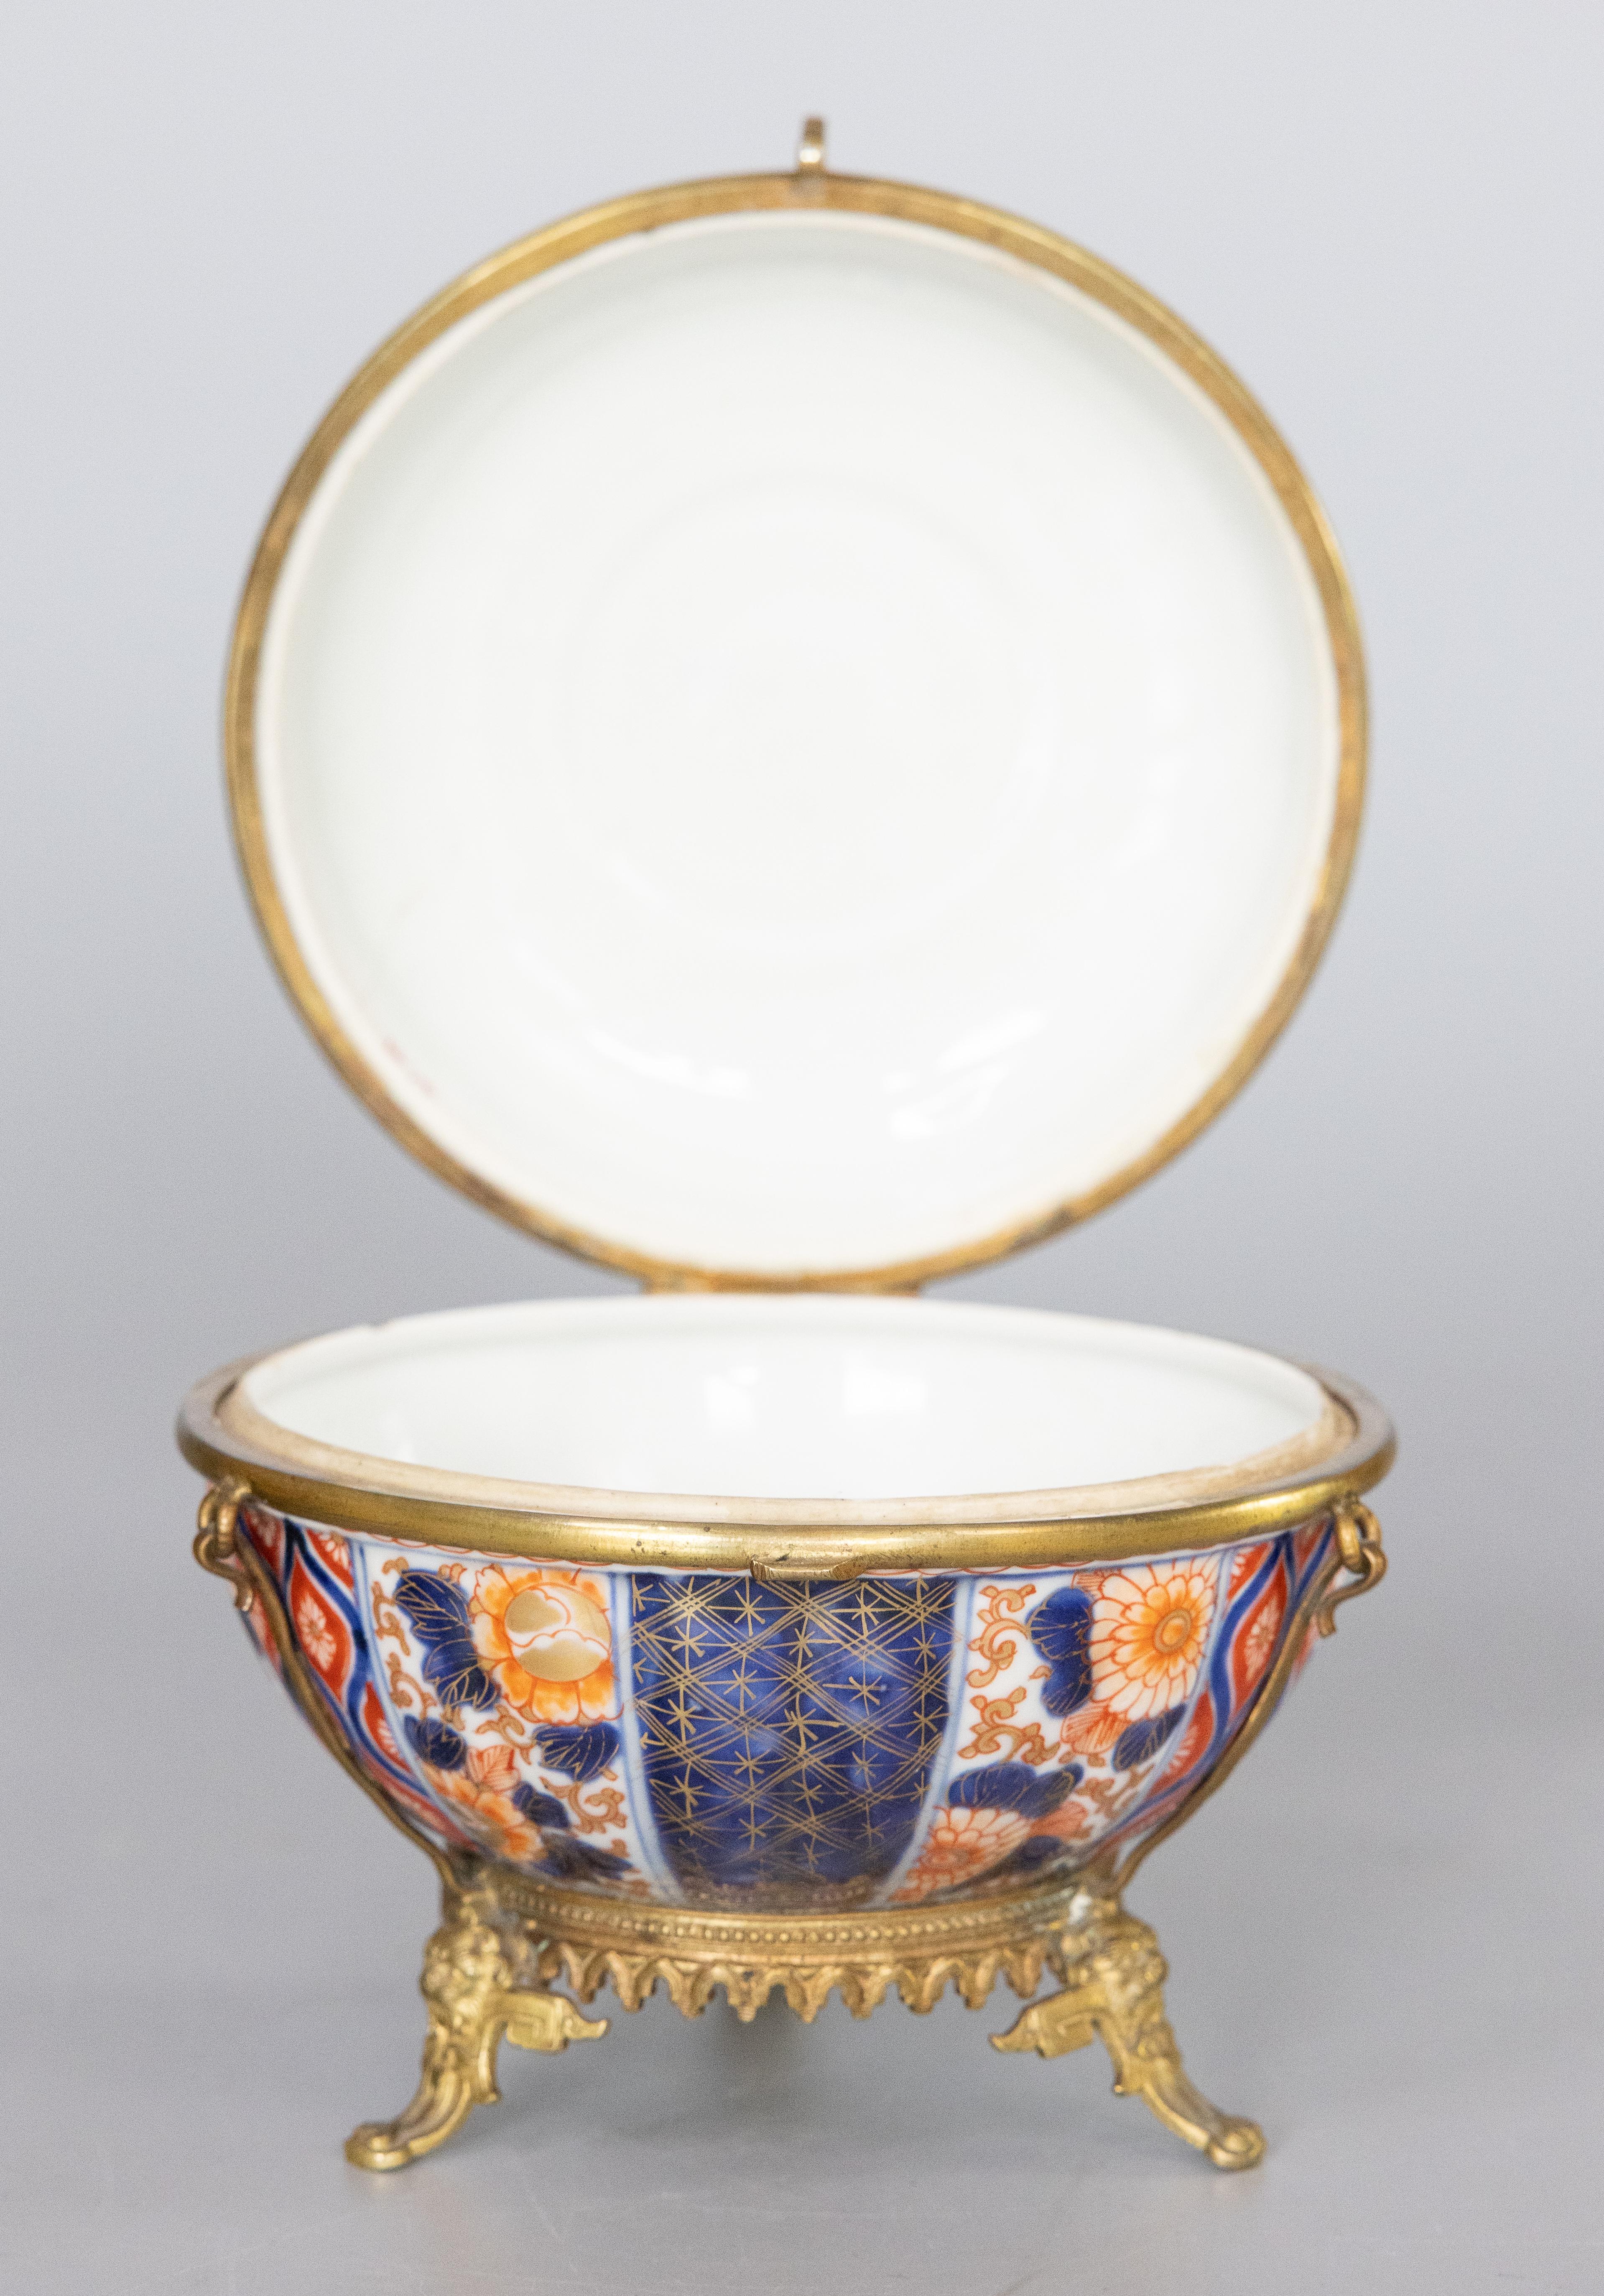 A fine and rare lidded and hinged Imari bowl with ormolu fittings, set atop three ornamented feet. Perfect for jewelry, trinkets, or sweets.